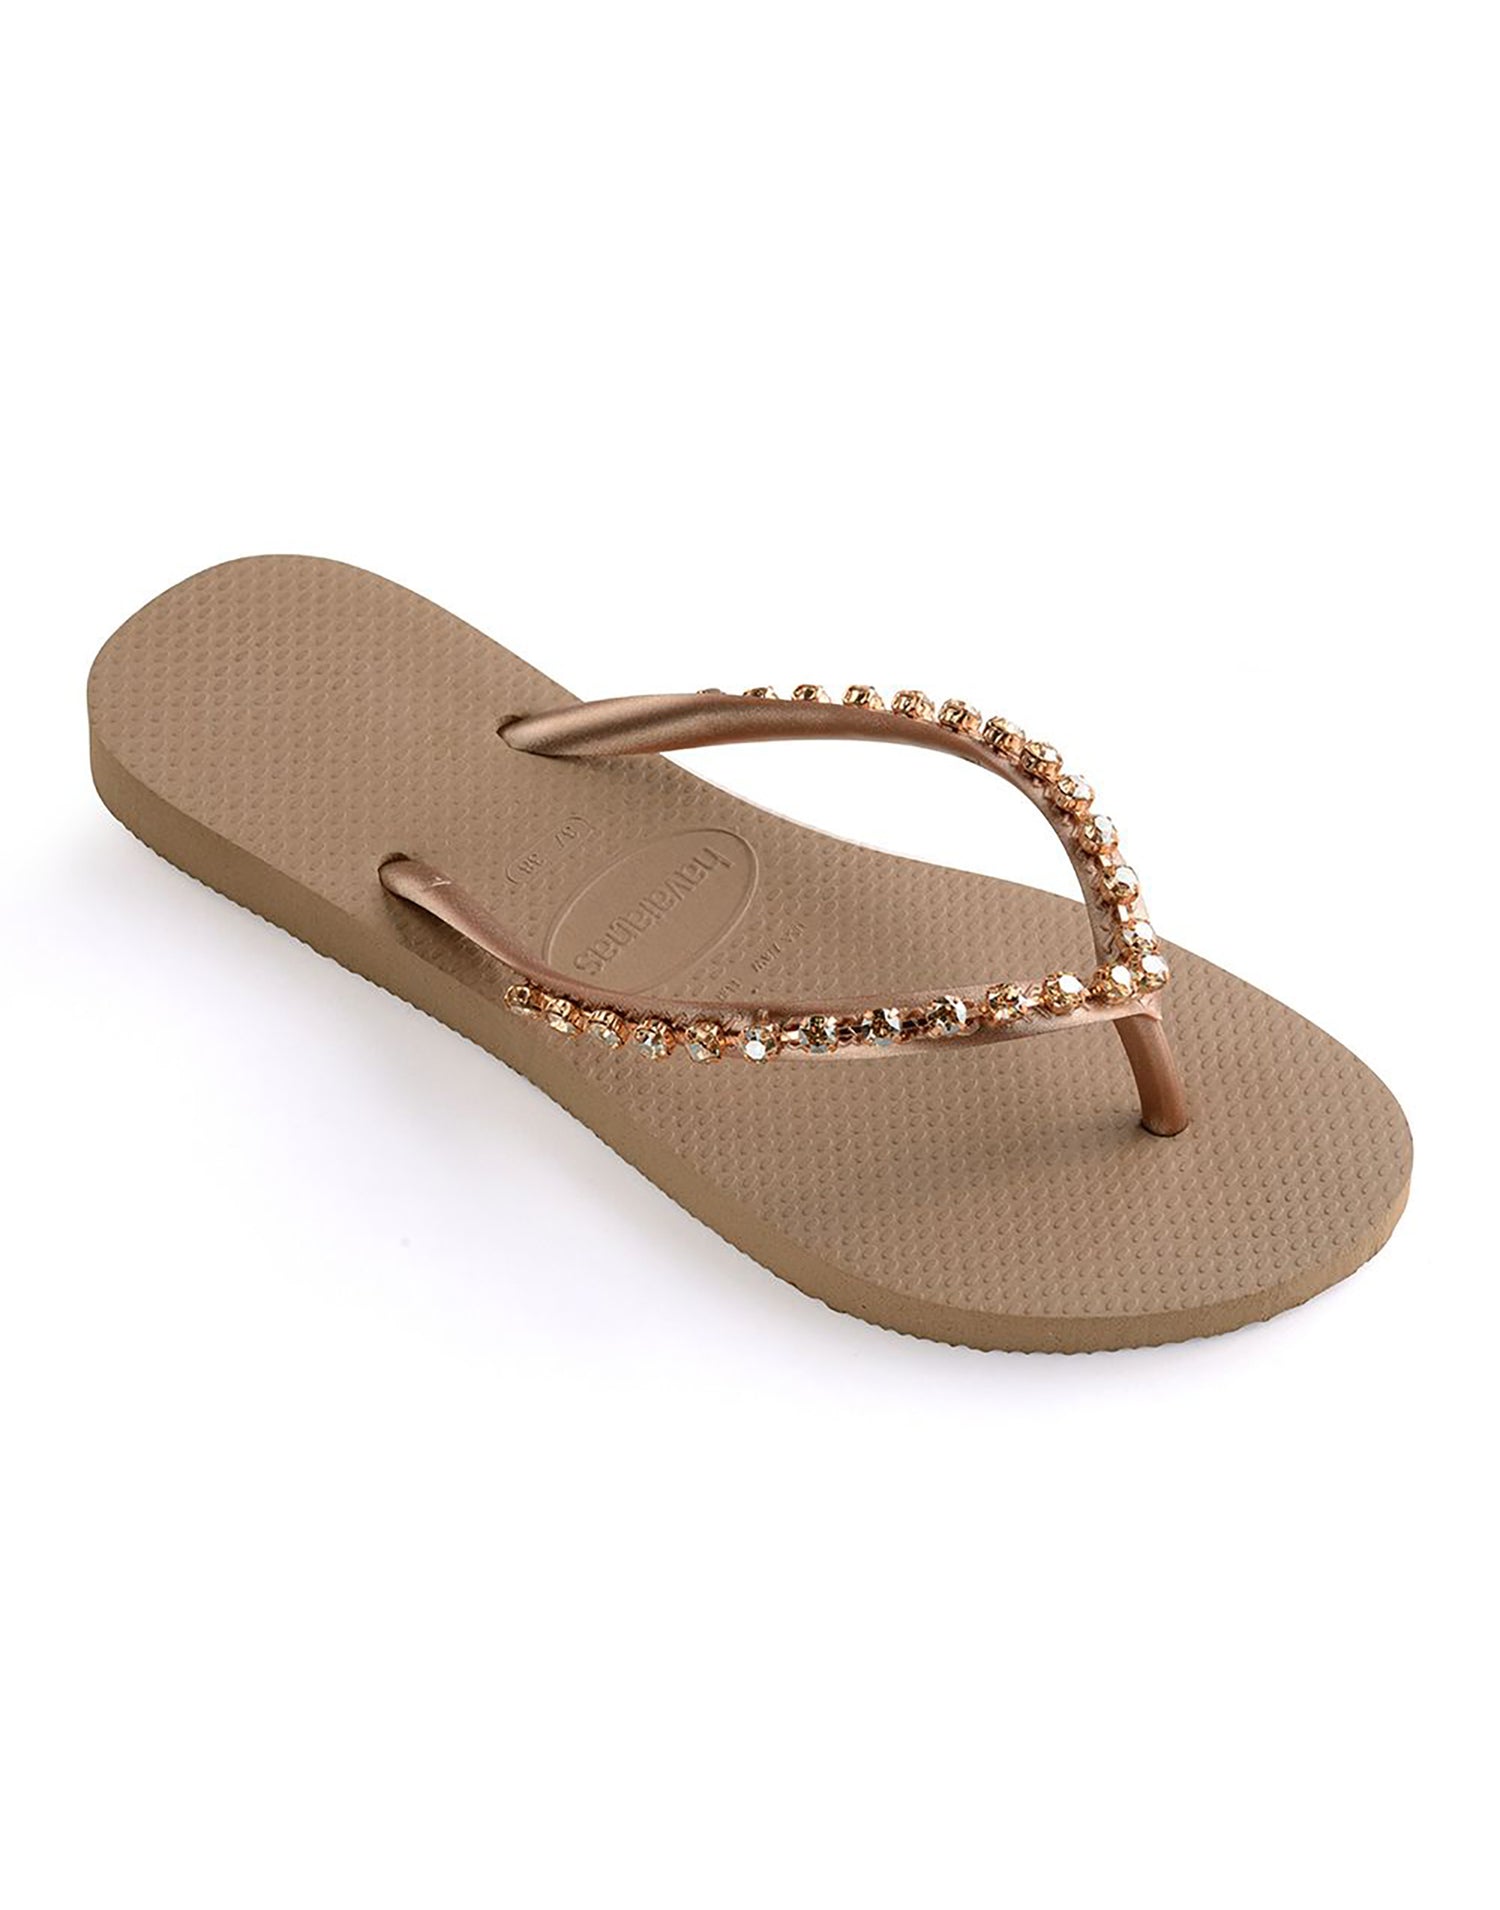 Slim Rock Mesh Sandal by Havaianas in Rose Gold - Angled View